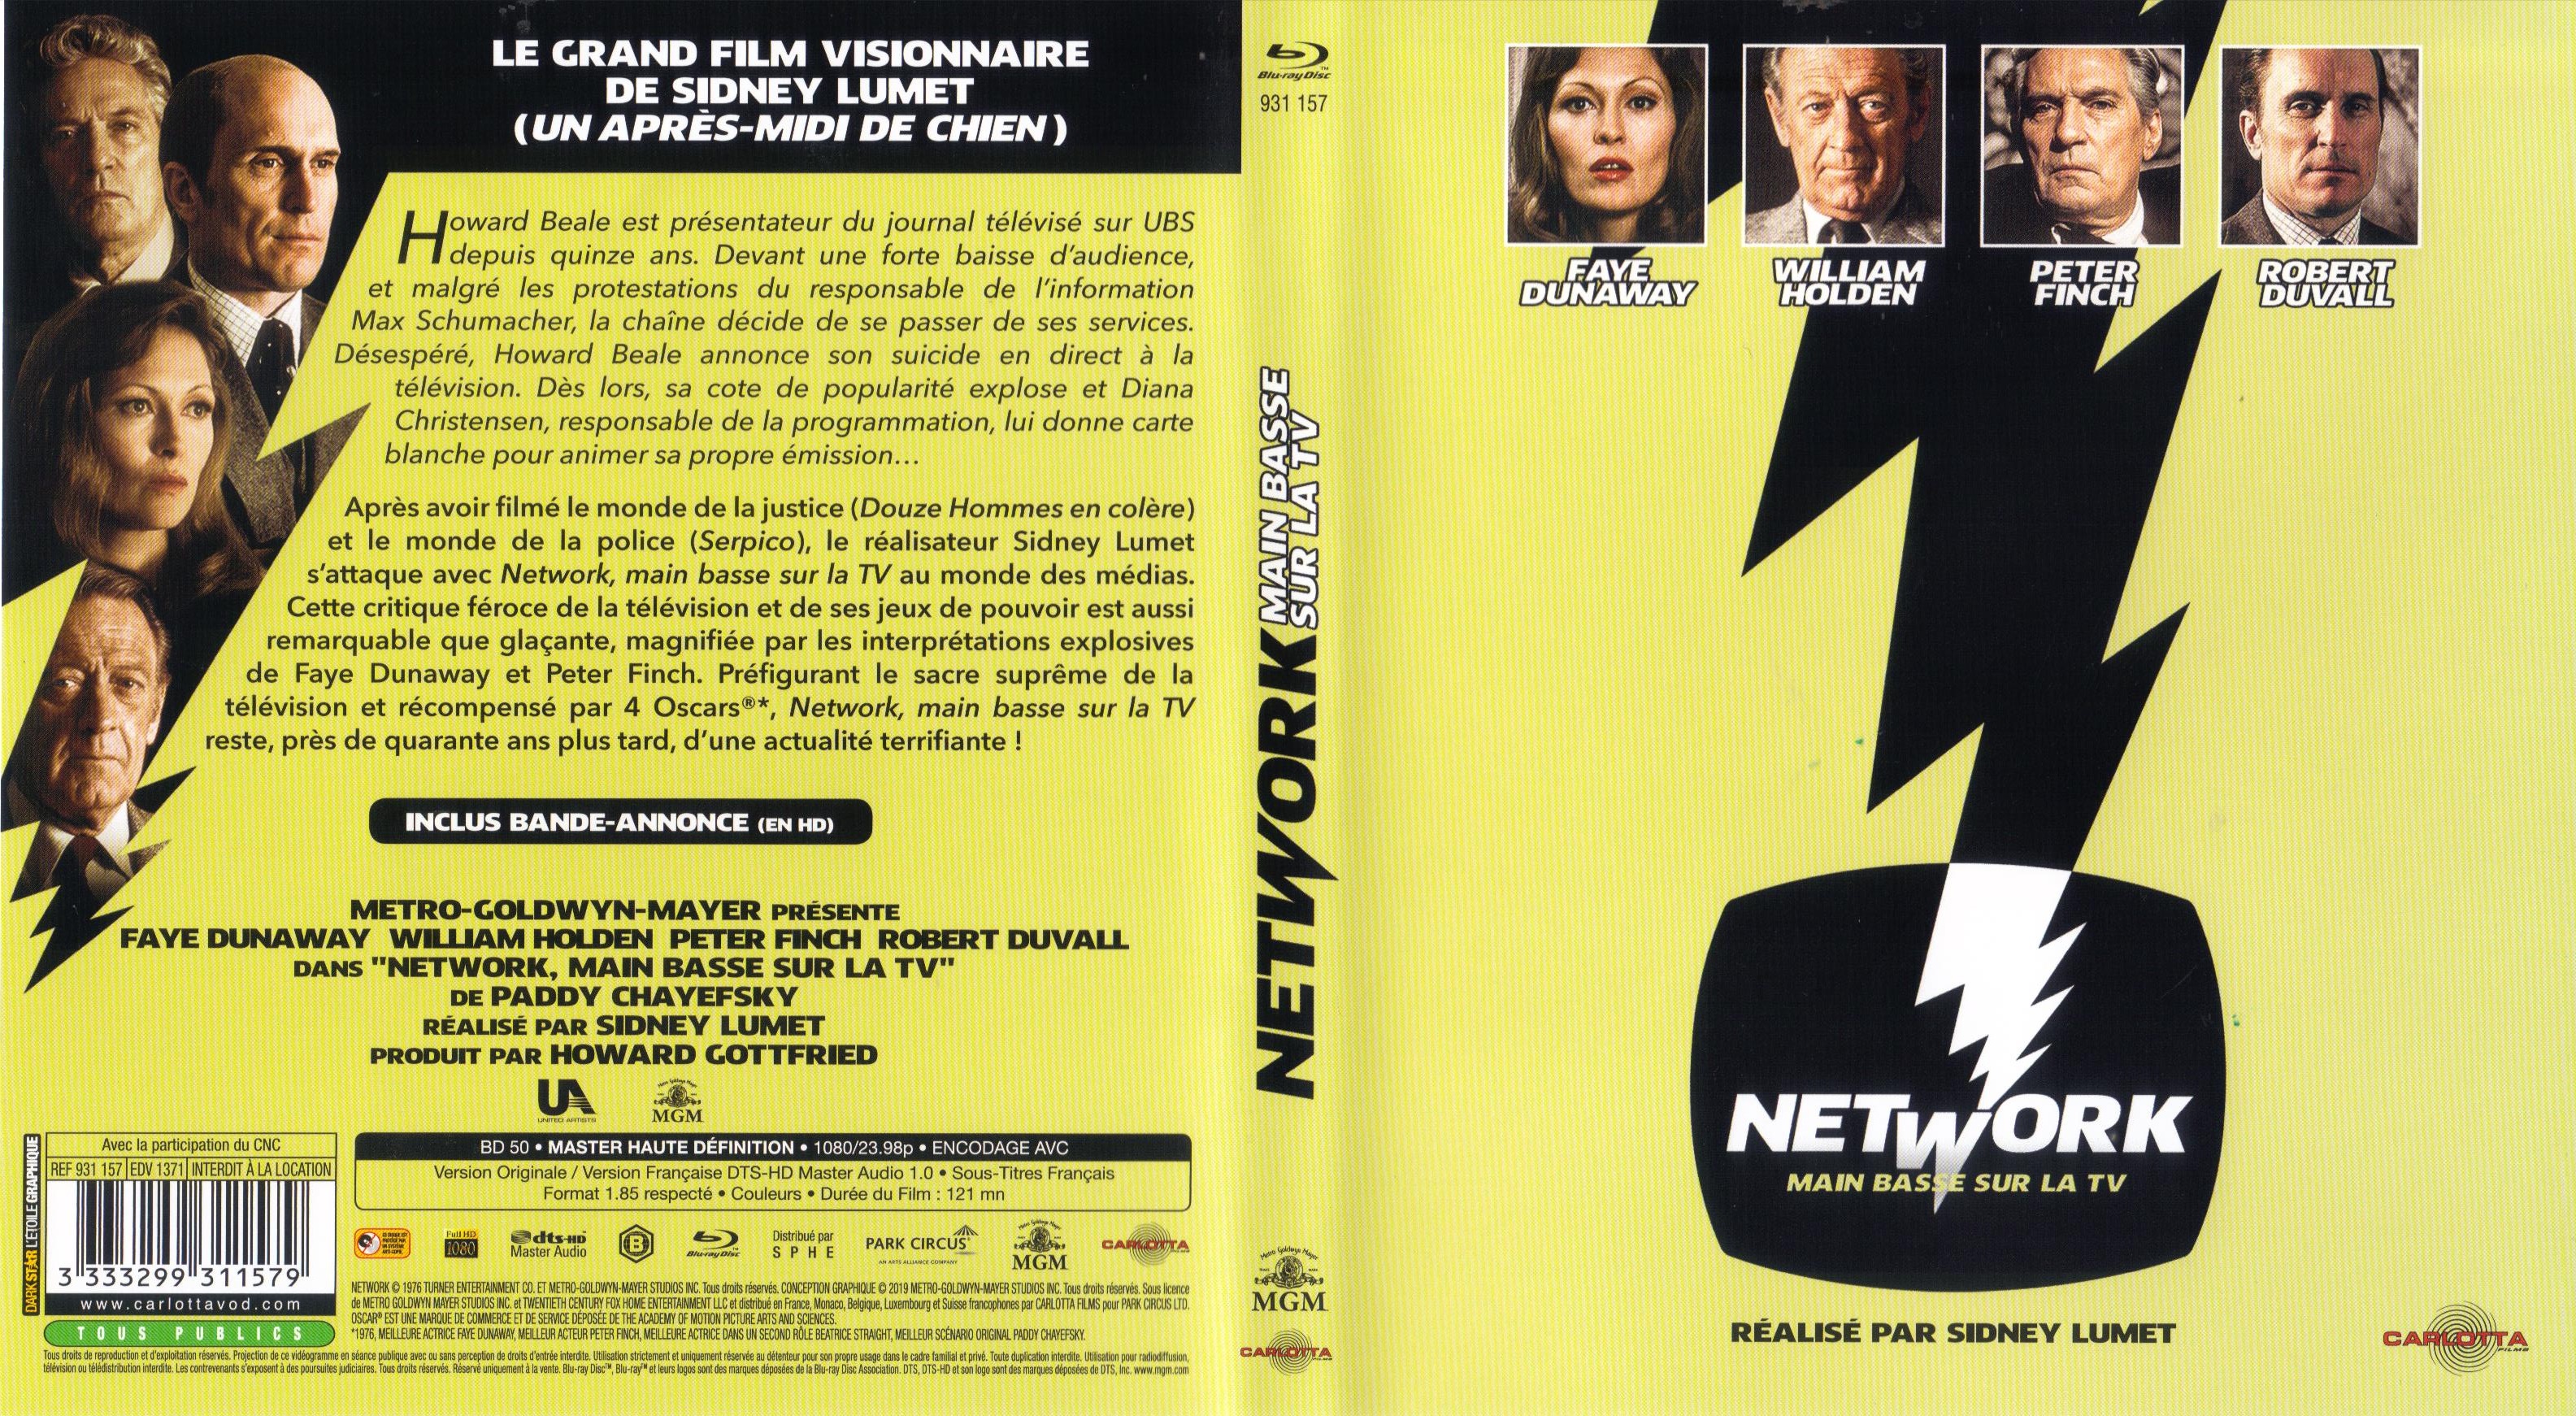 Jaquette DVD Network (BLU-RAY)